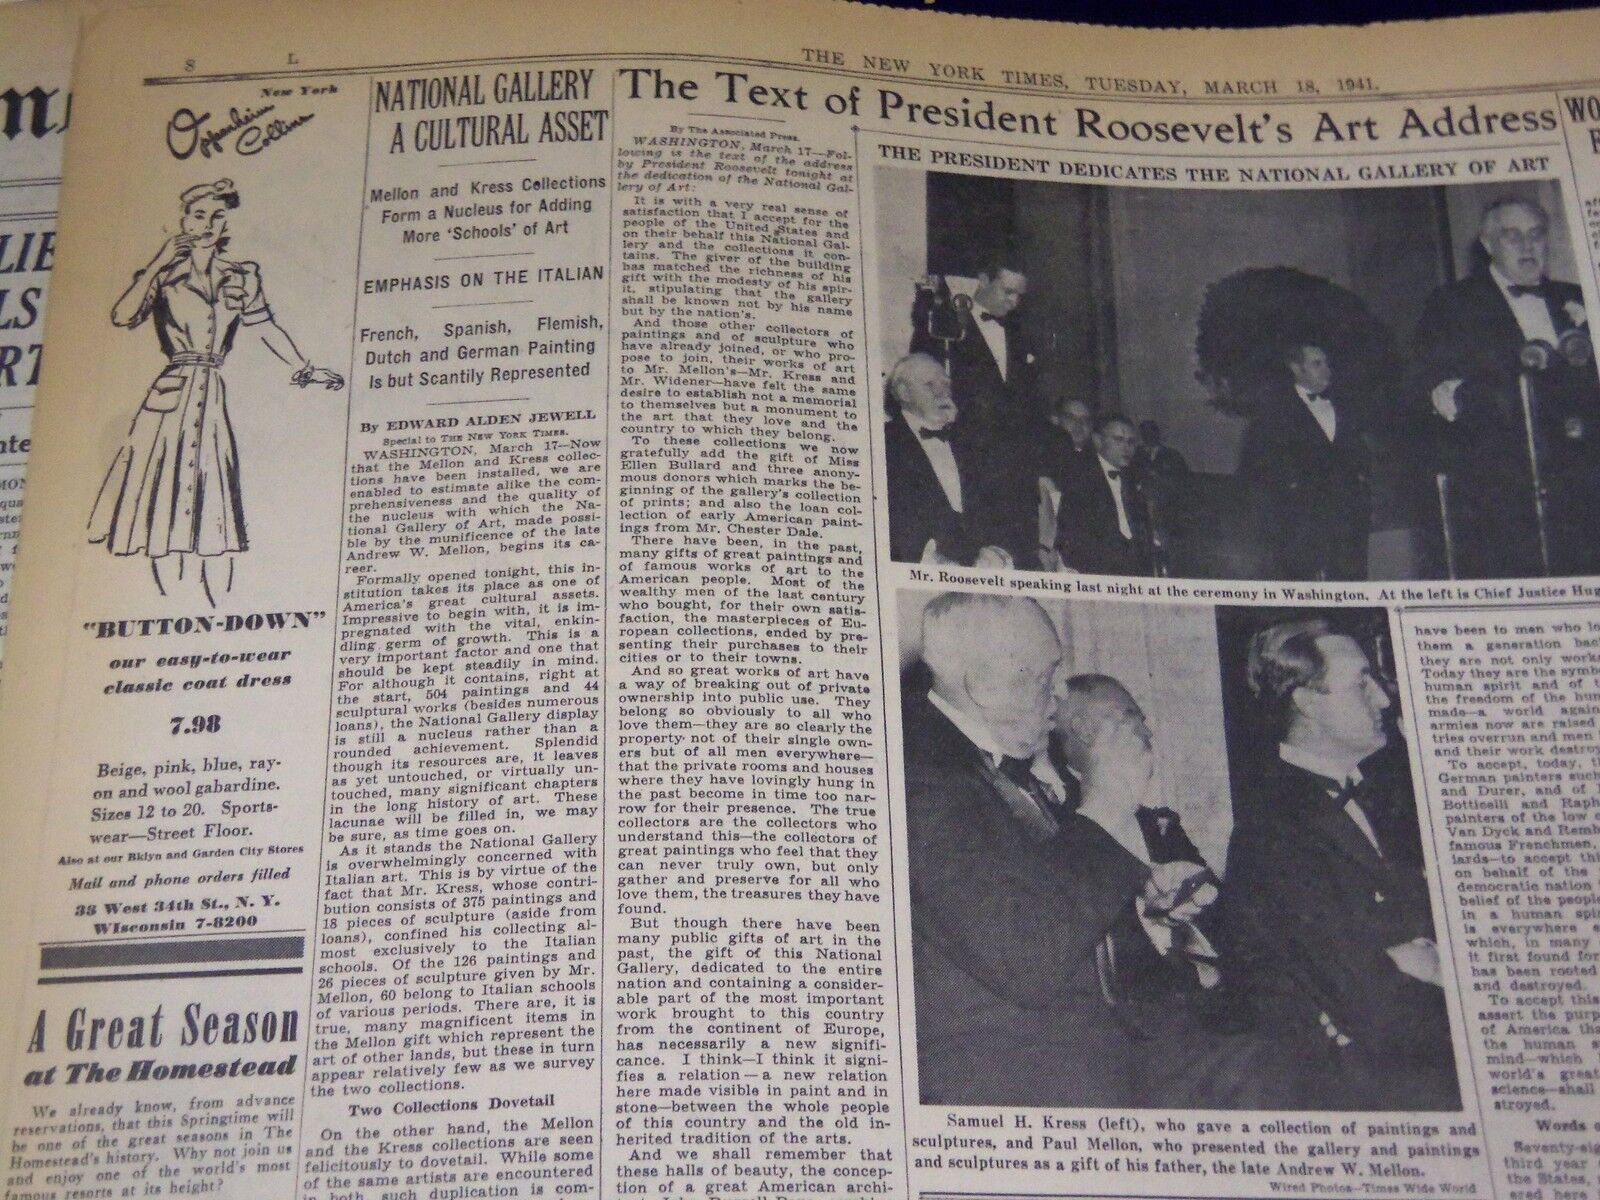 1941 MARCH 18 NEW YORK TIMES - NATIONAL GALLERY OPENS IN WASHINGTON - NT 1299